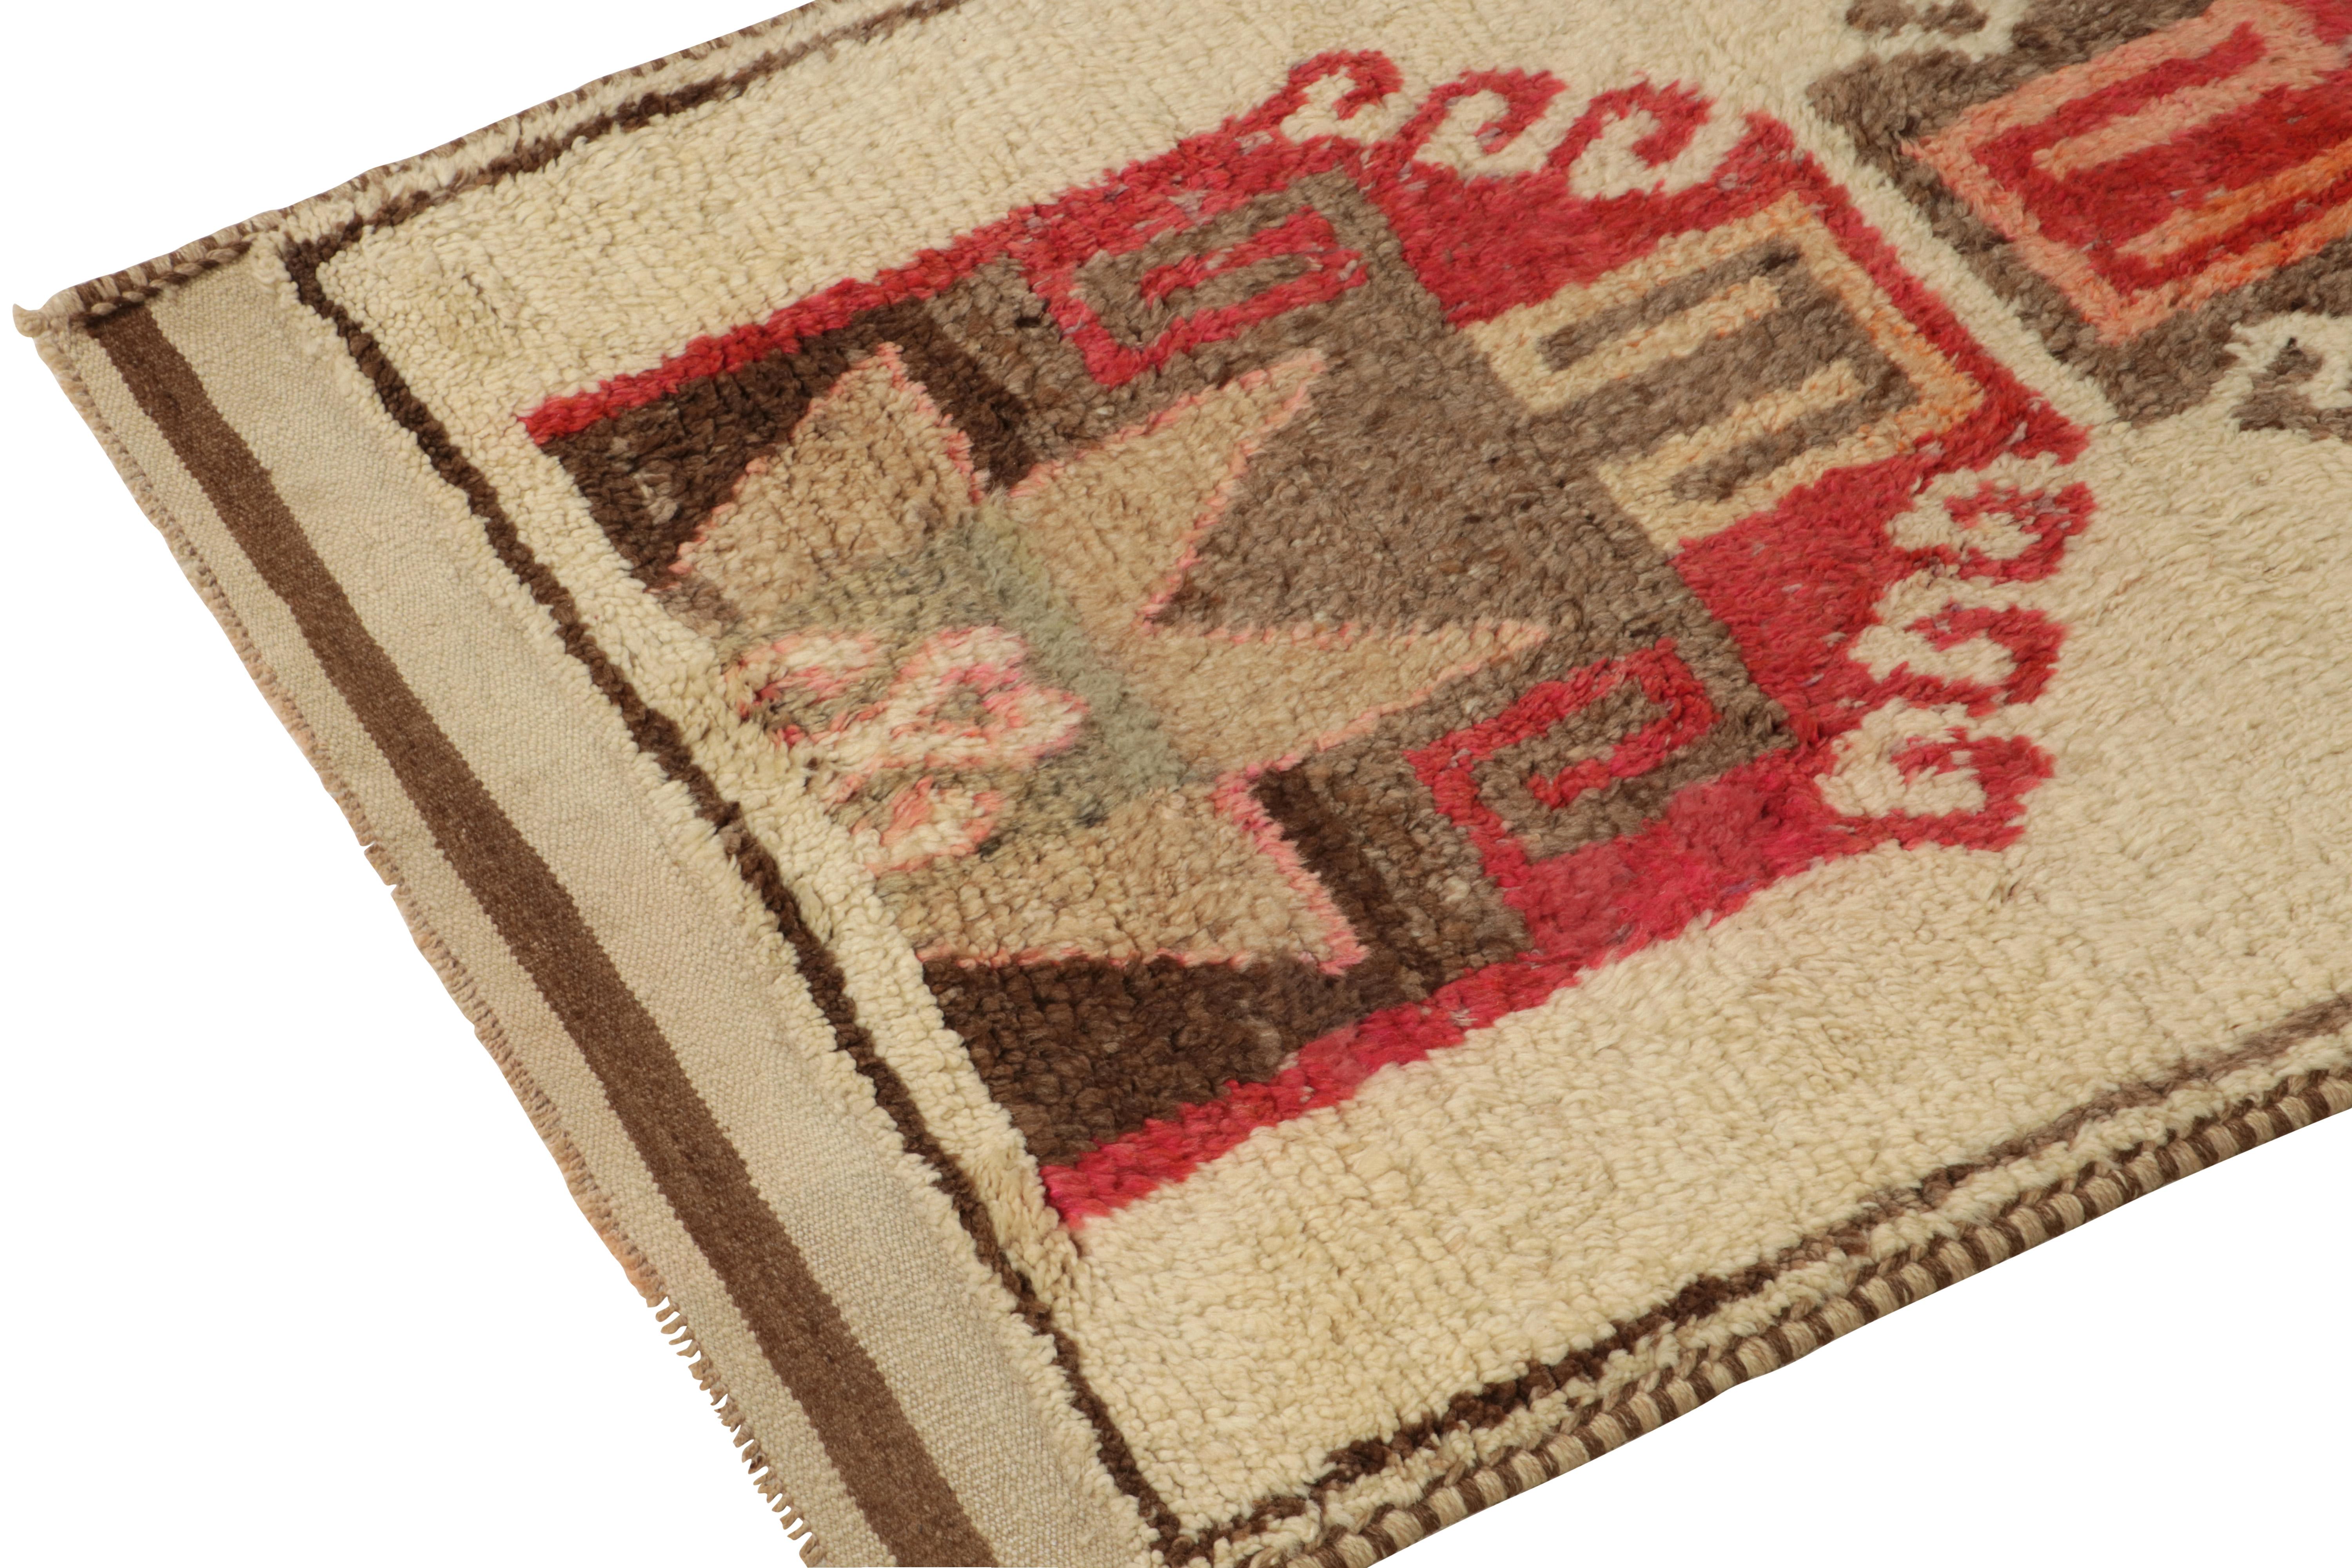 Hand-Knotted Vintage Tribal Runner in Beige-Brown, Red Medallion Patterns by Rug & Kilim For Sale